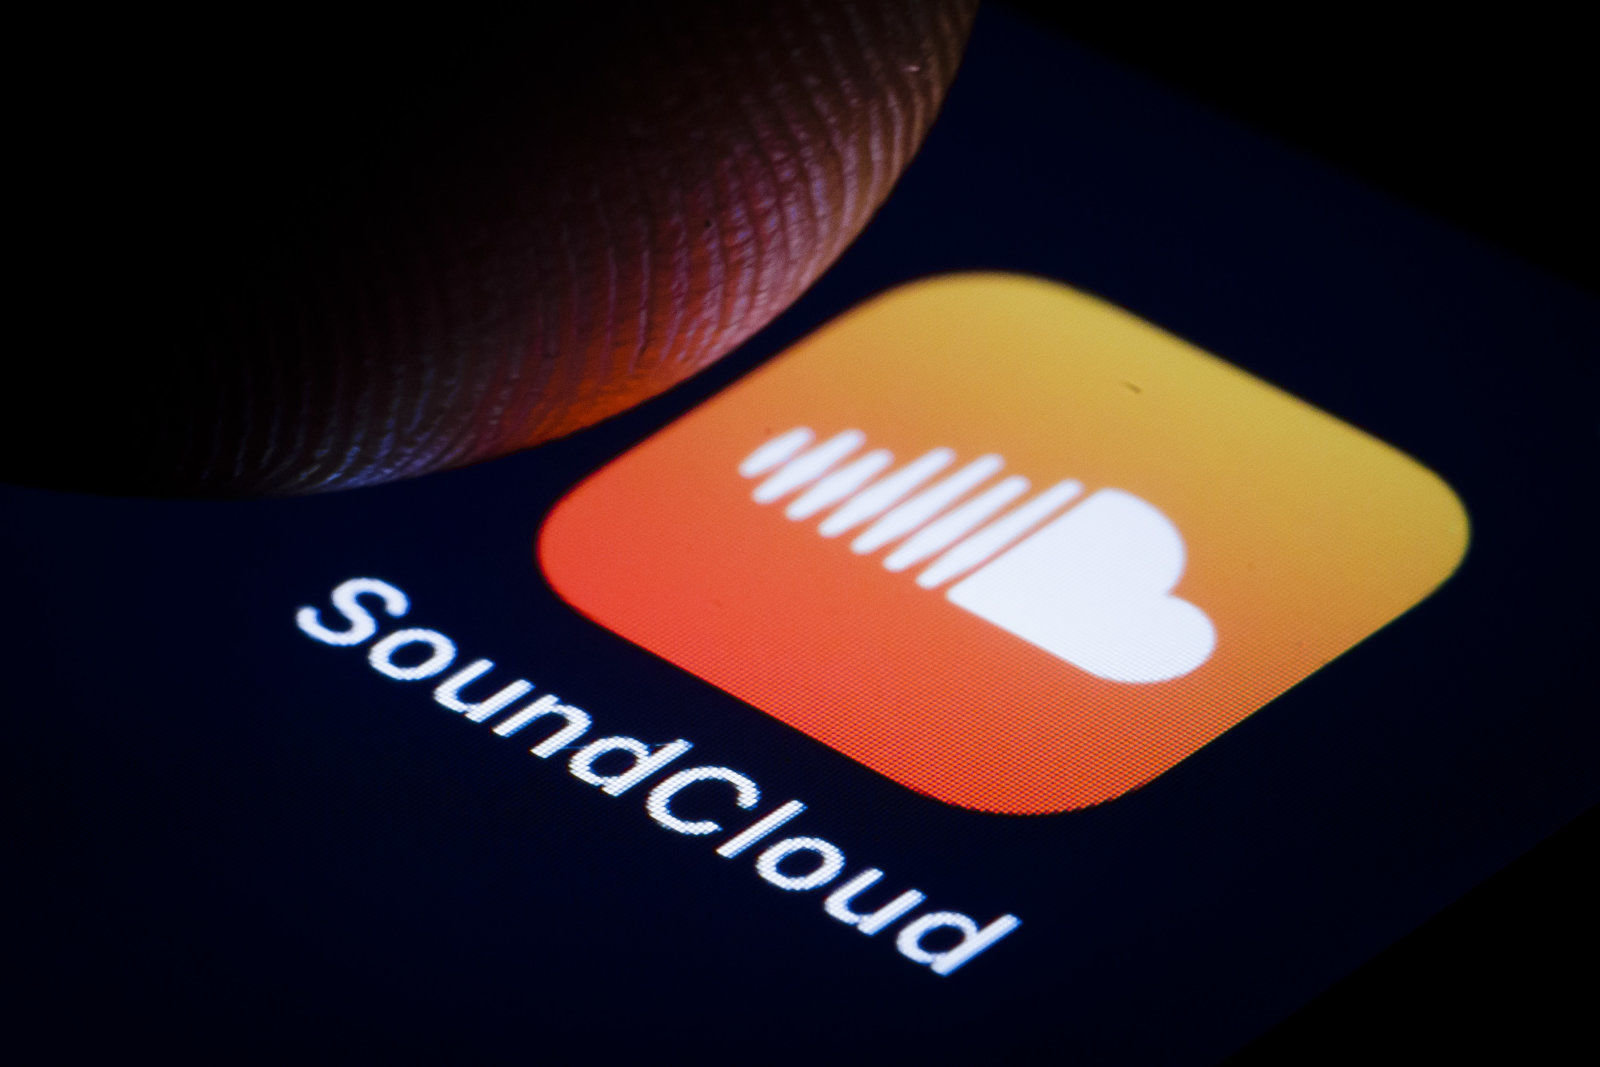 BERLIN, GERMANY - JANUARY 16: In this photo illustration the logo of the music streaming service SoundCloud is displayed on a smartphone on January 16, 2019 in Berlin, Germany. (Photo by Thomas Trutschel/Photothek via Getty Images)